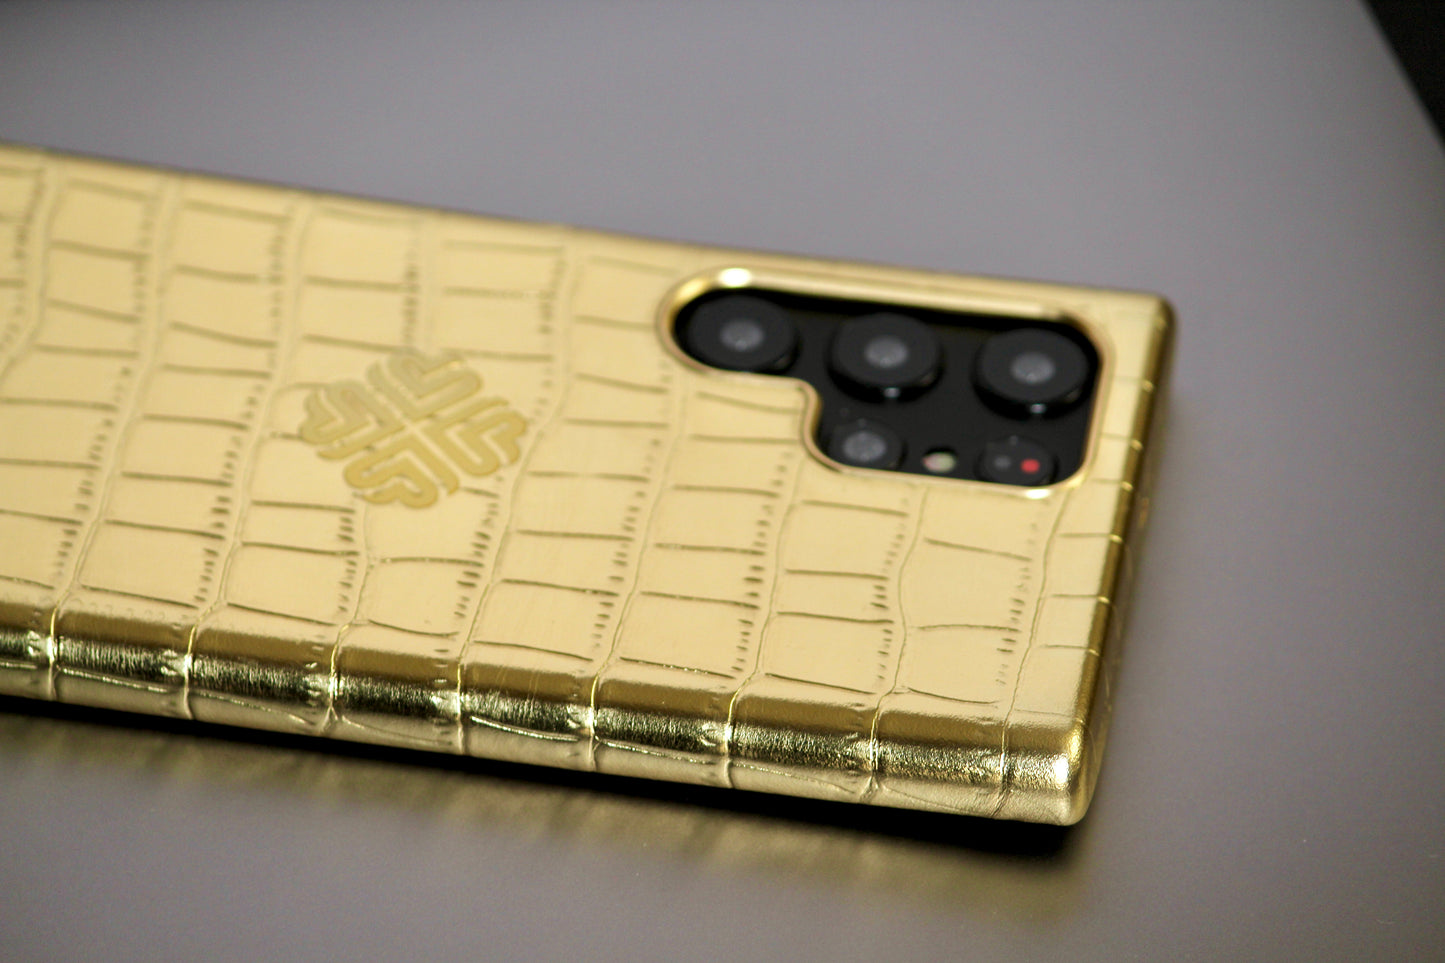 Royal Gold | Premium Leather Luxury S22 Ultra Cover